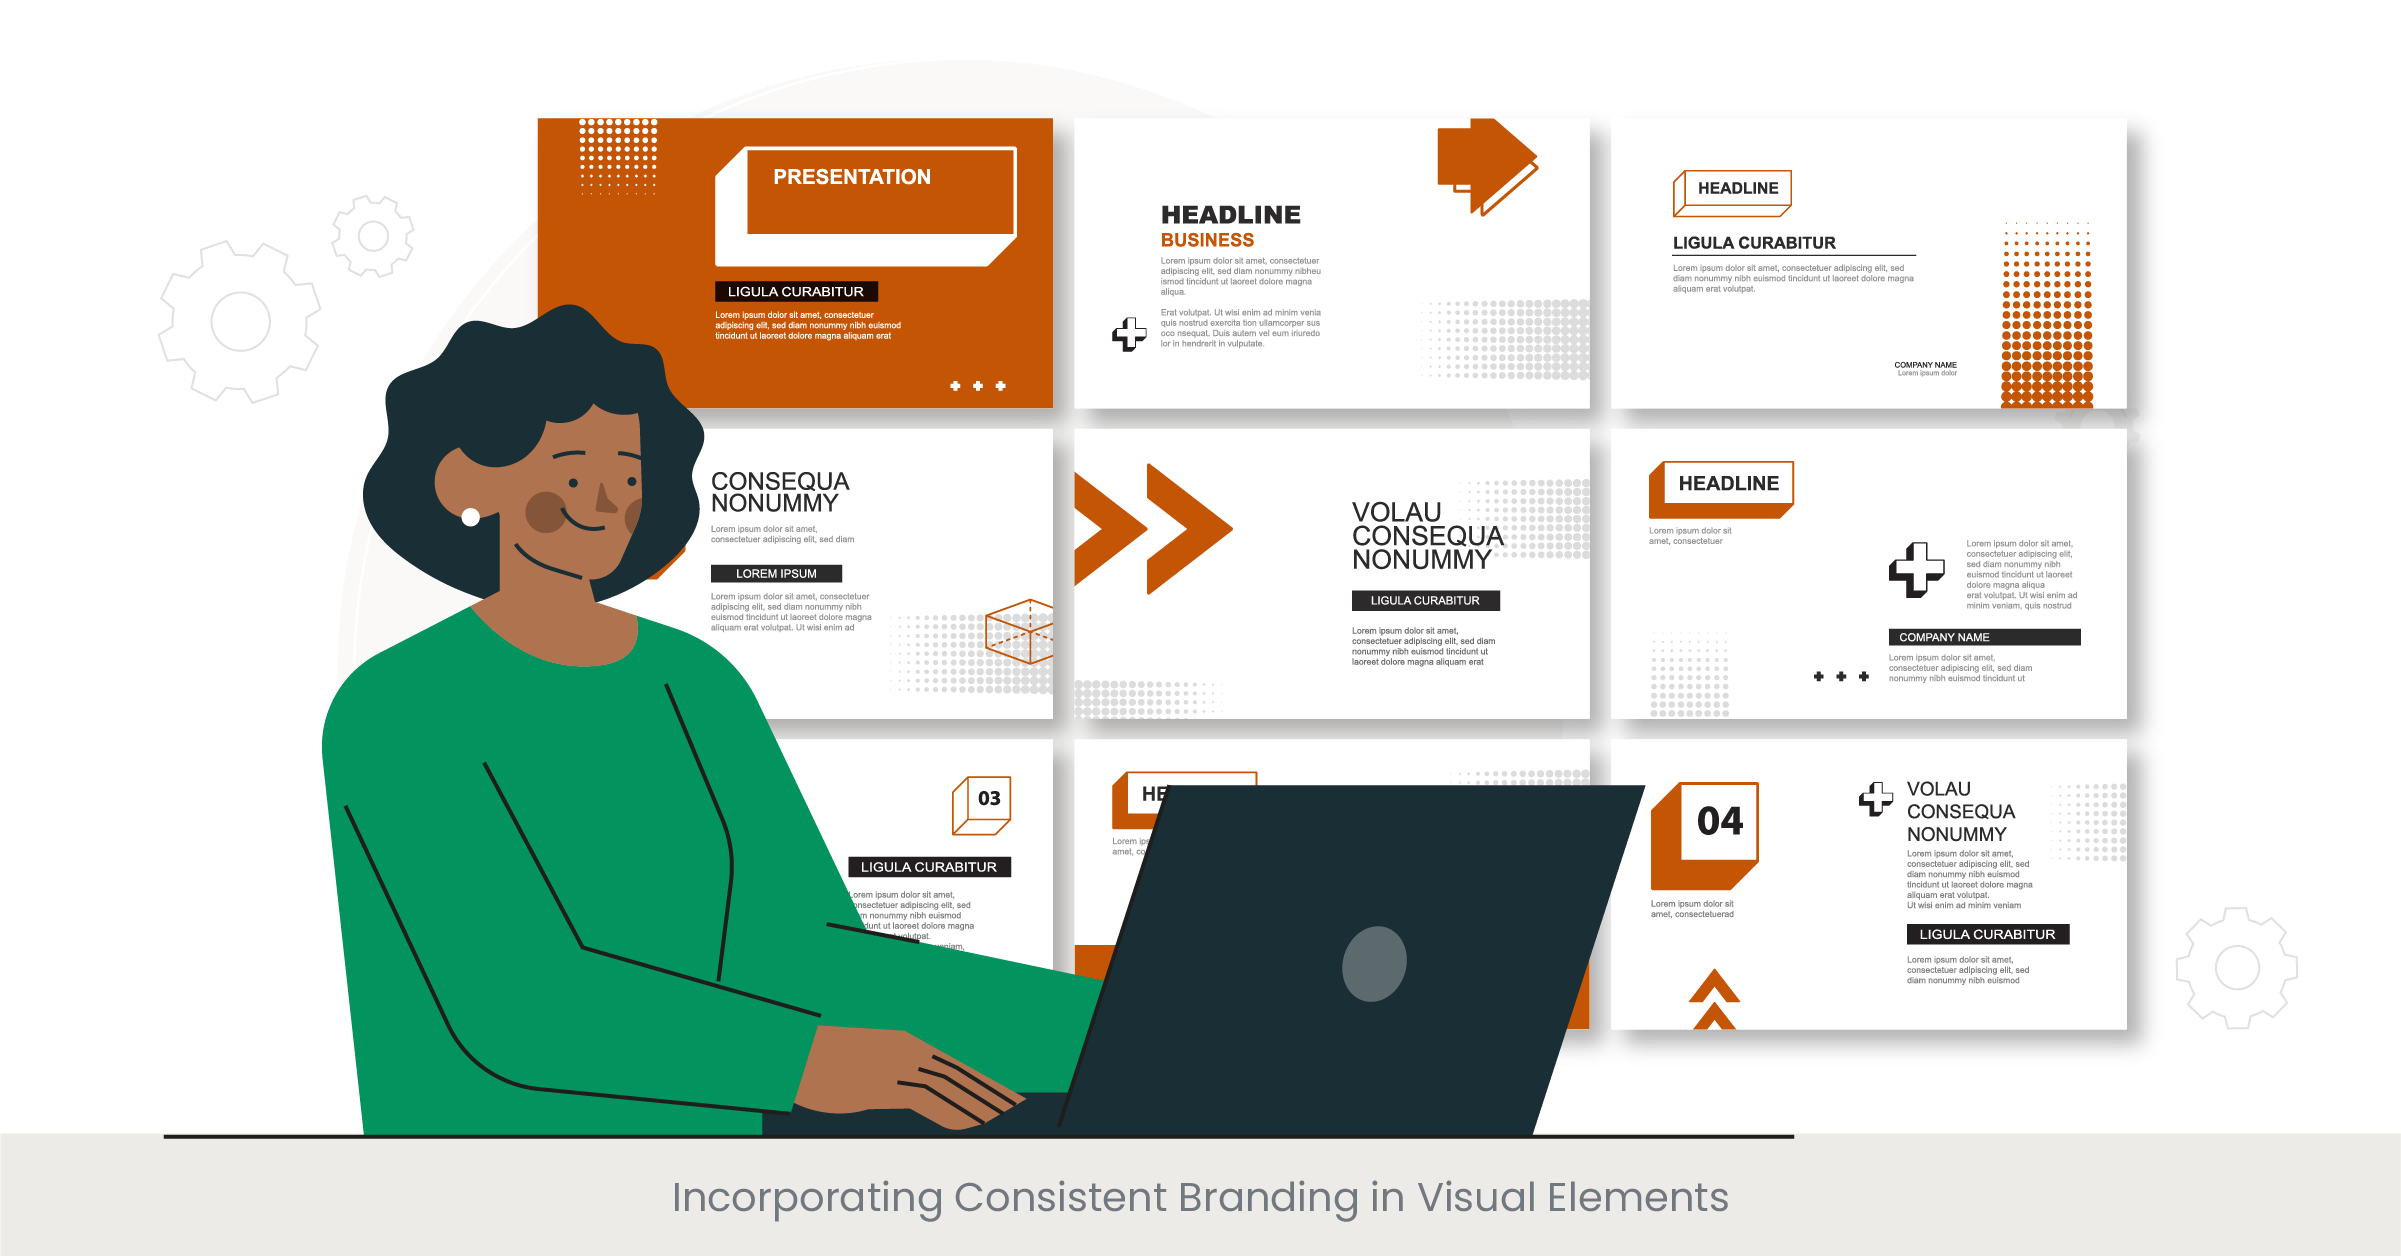 Incorporating Consistent Branding in Visual Elements